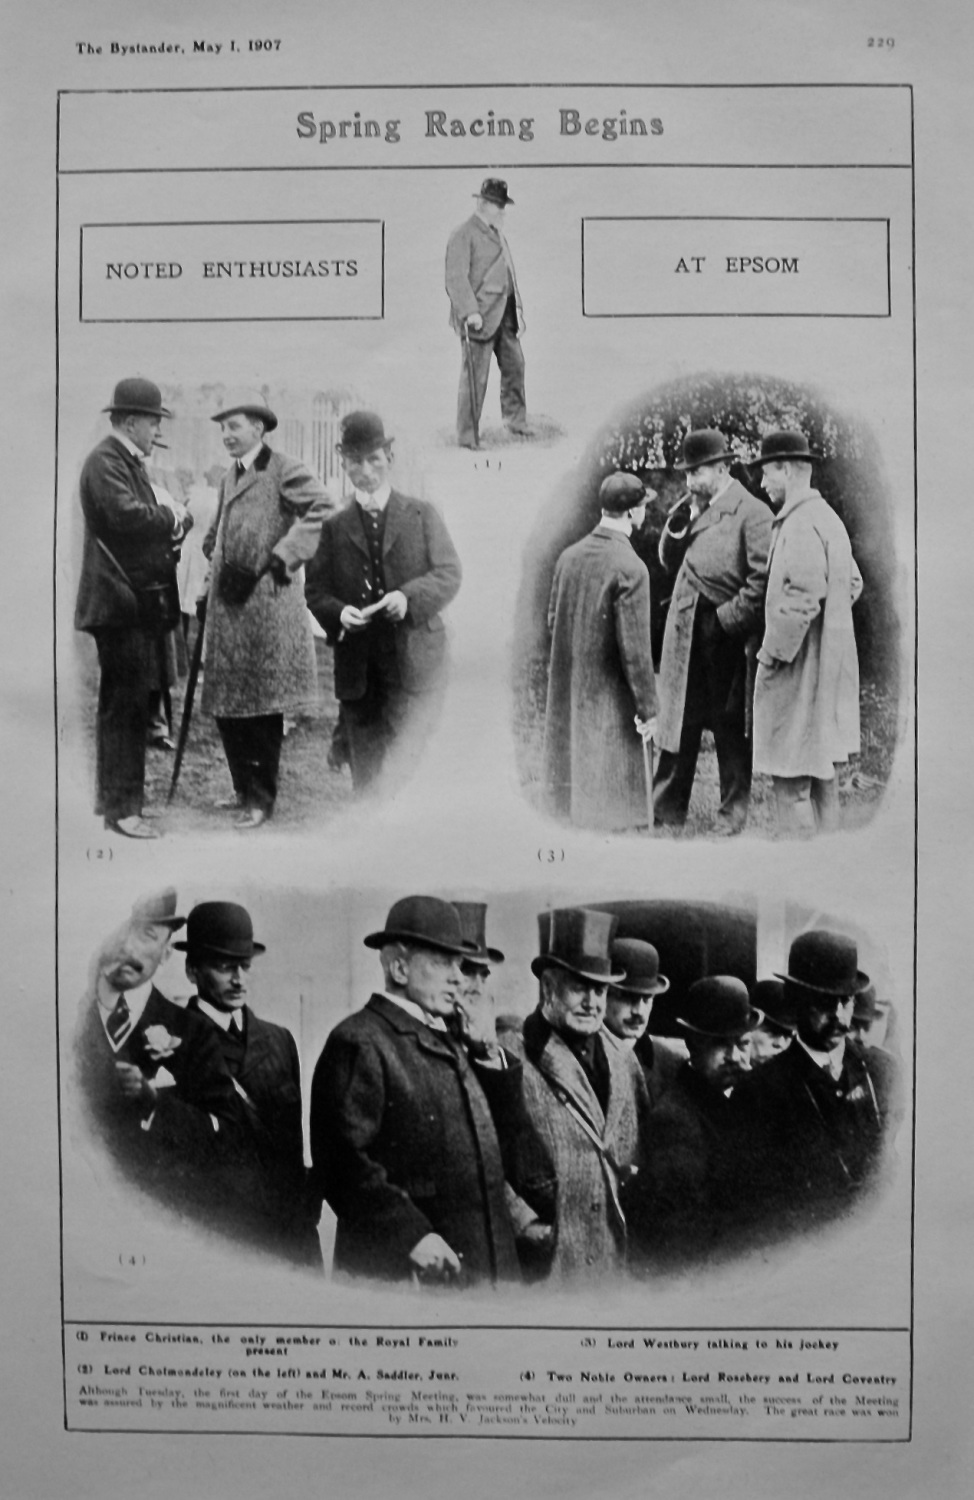 Spring Racing Begins : Noted Enthusiasts at Epsom. 1907.